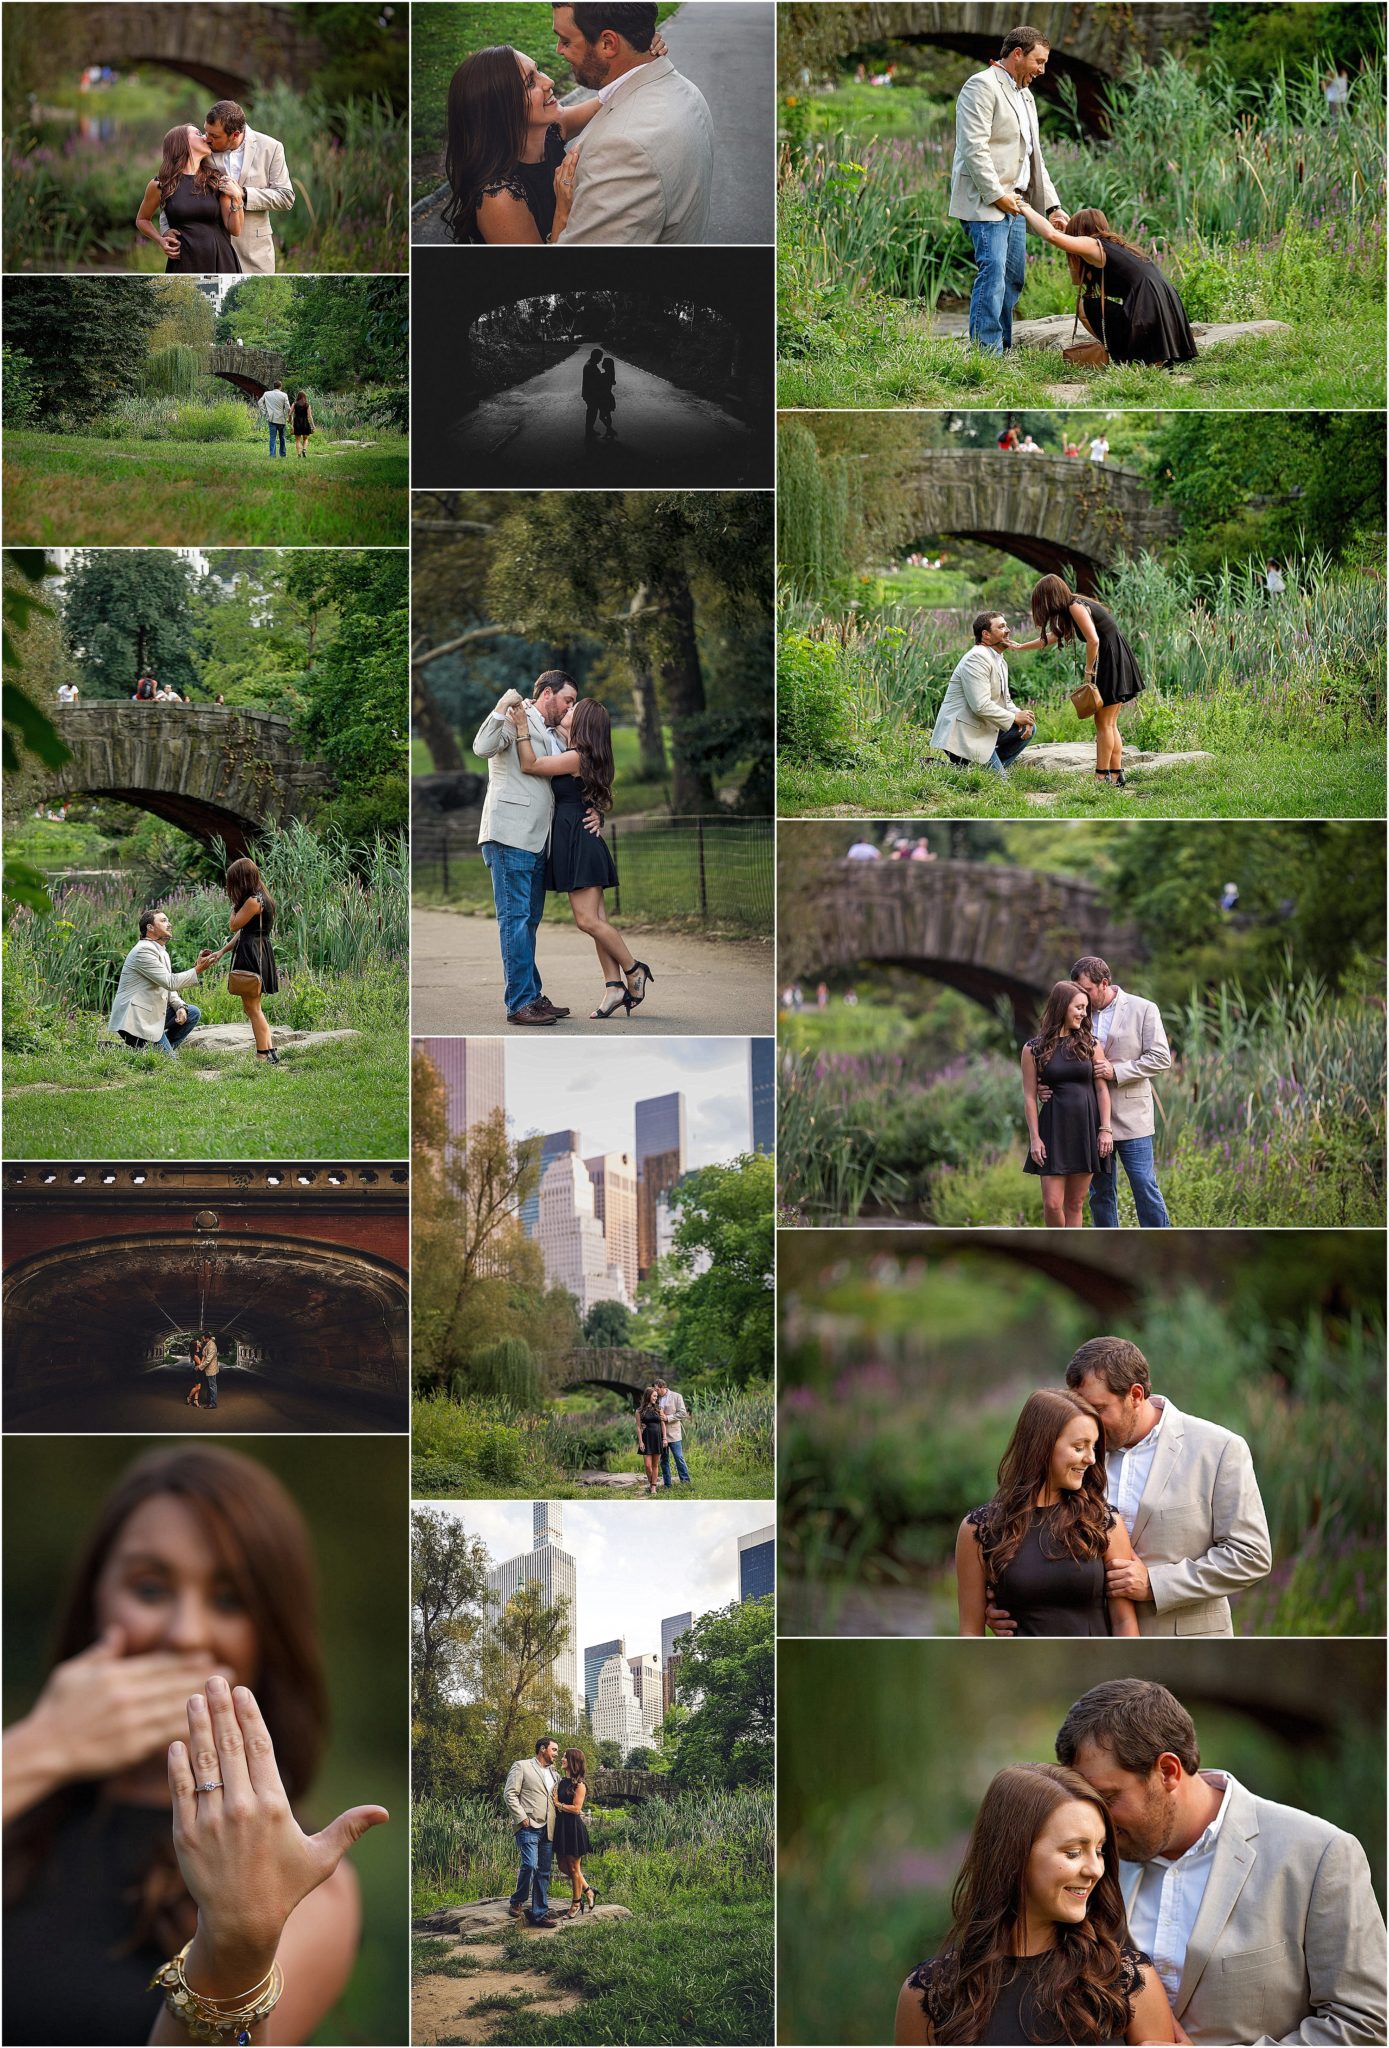 NYC, Proposal, NYC Proposal, Central Park, Cory Lee Photography, Destination Proposal, Planned Proposal, Charleston Wedding Photographer, Charleston engagement photographer, engaged, diamonds direct, central park, central park proposal, new york city, new york new york